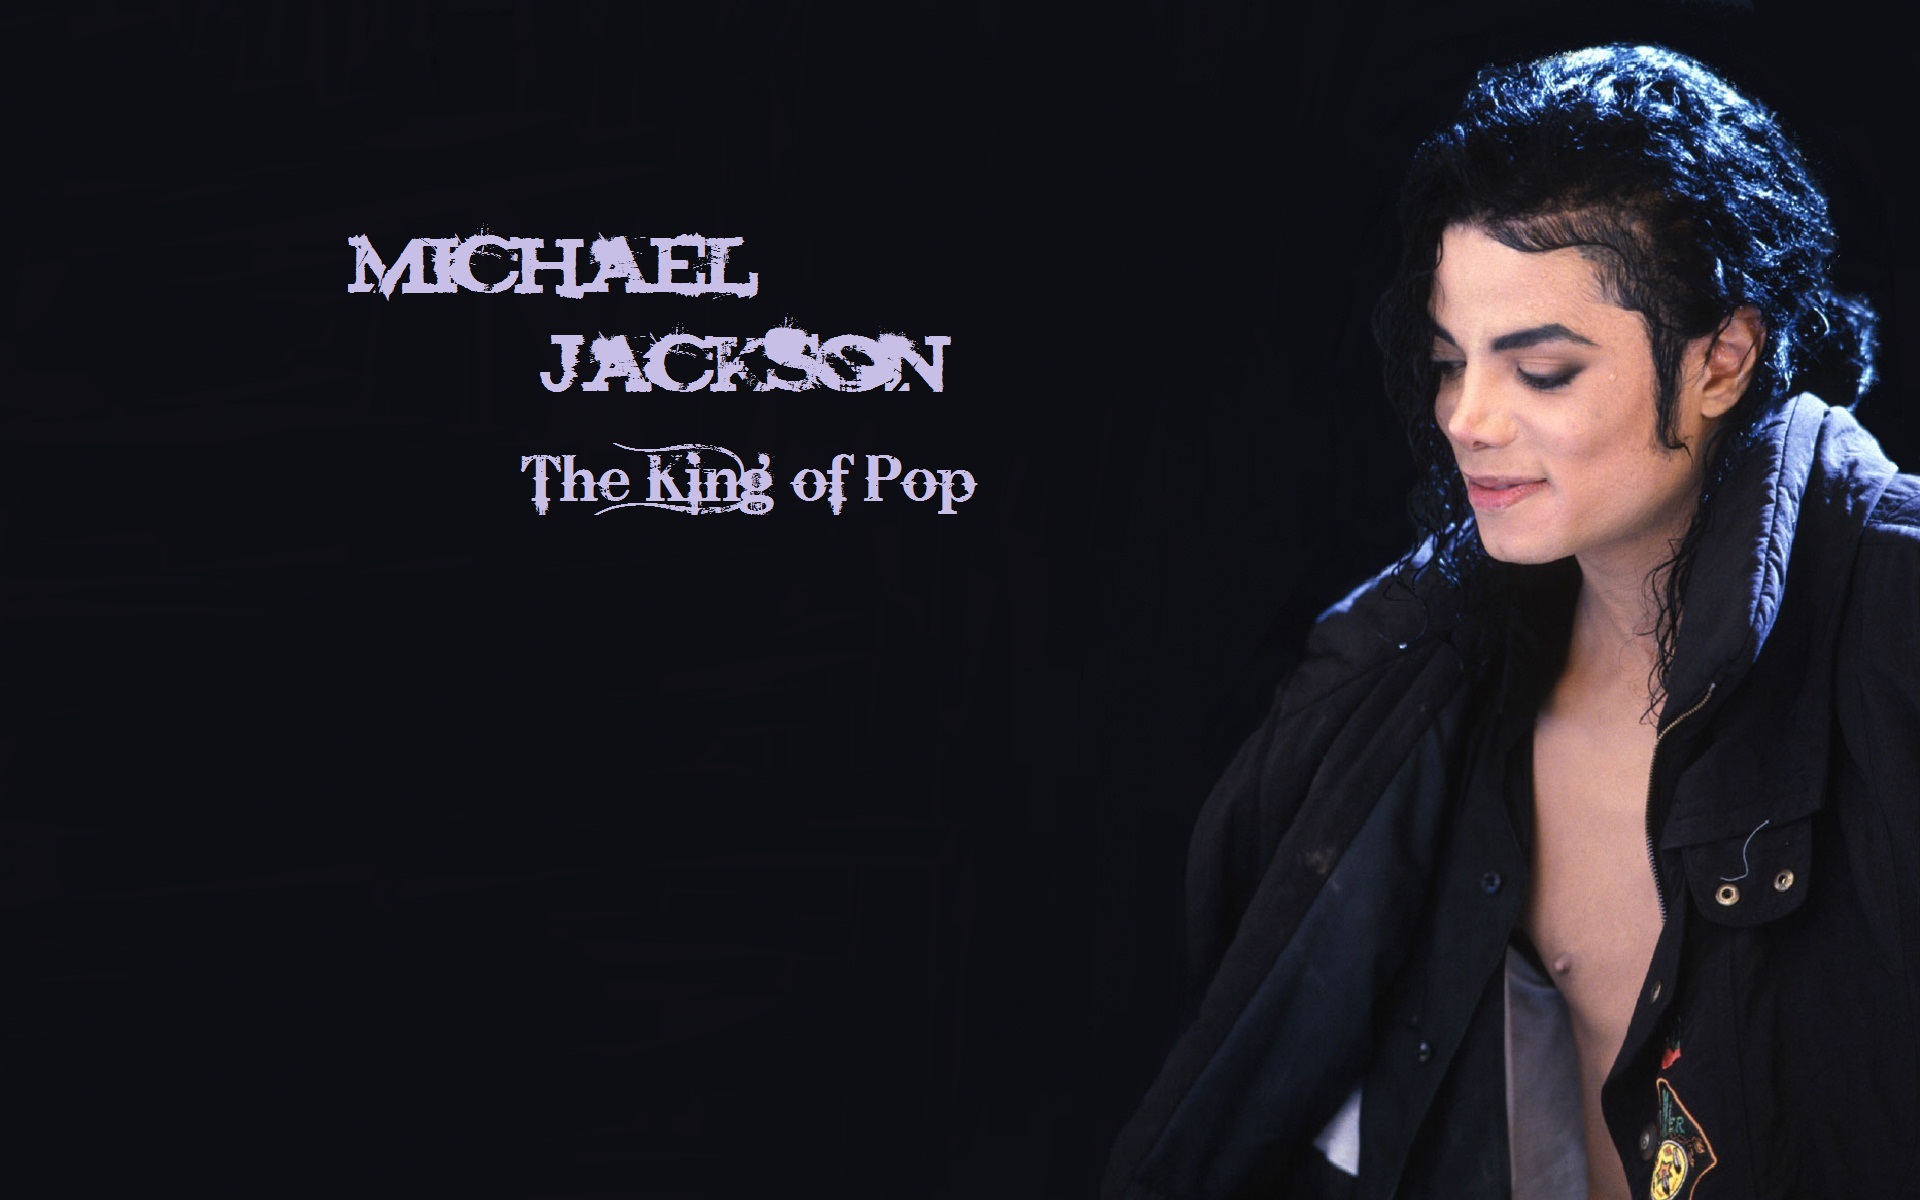 Michael Jackson Wallpaper Pictures In High Definition Or Widescreen